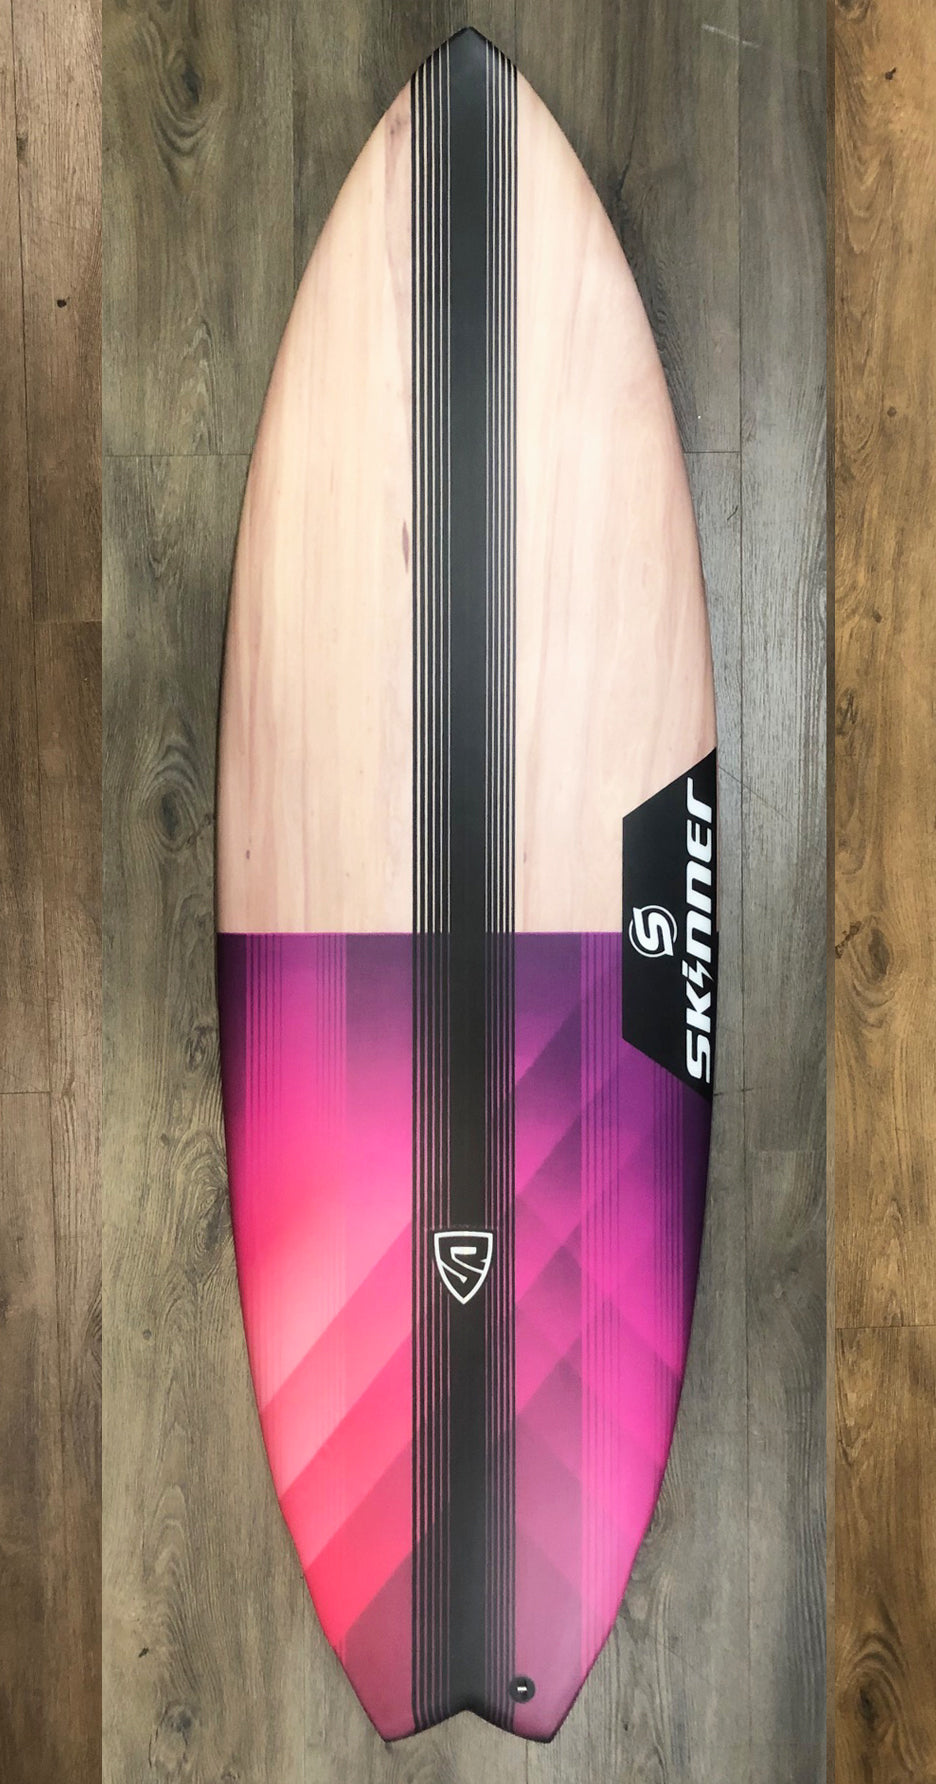 SOLD Skinner RS5 Fish 5'9 x 21.1" x " 34.3 Liters Five FCS2 Plugs Swallow Tail EPS Epoxy Surfboard Surfboard